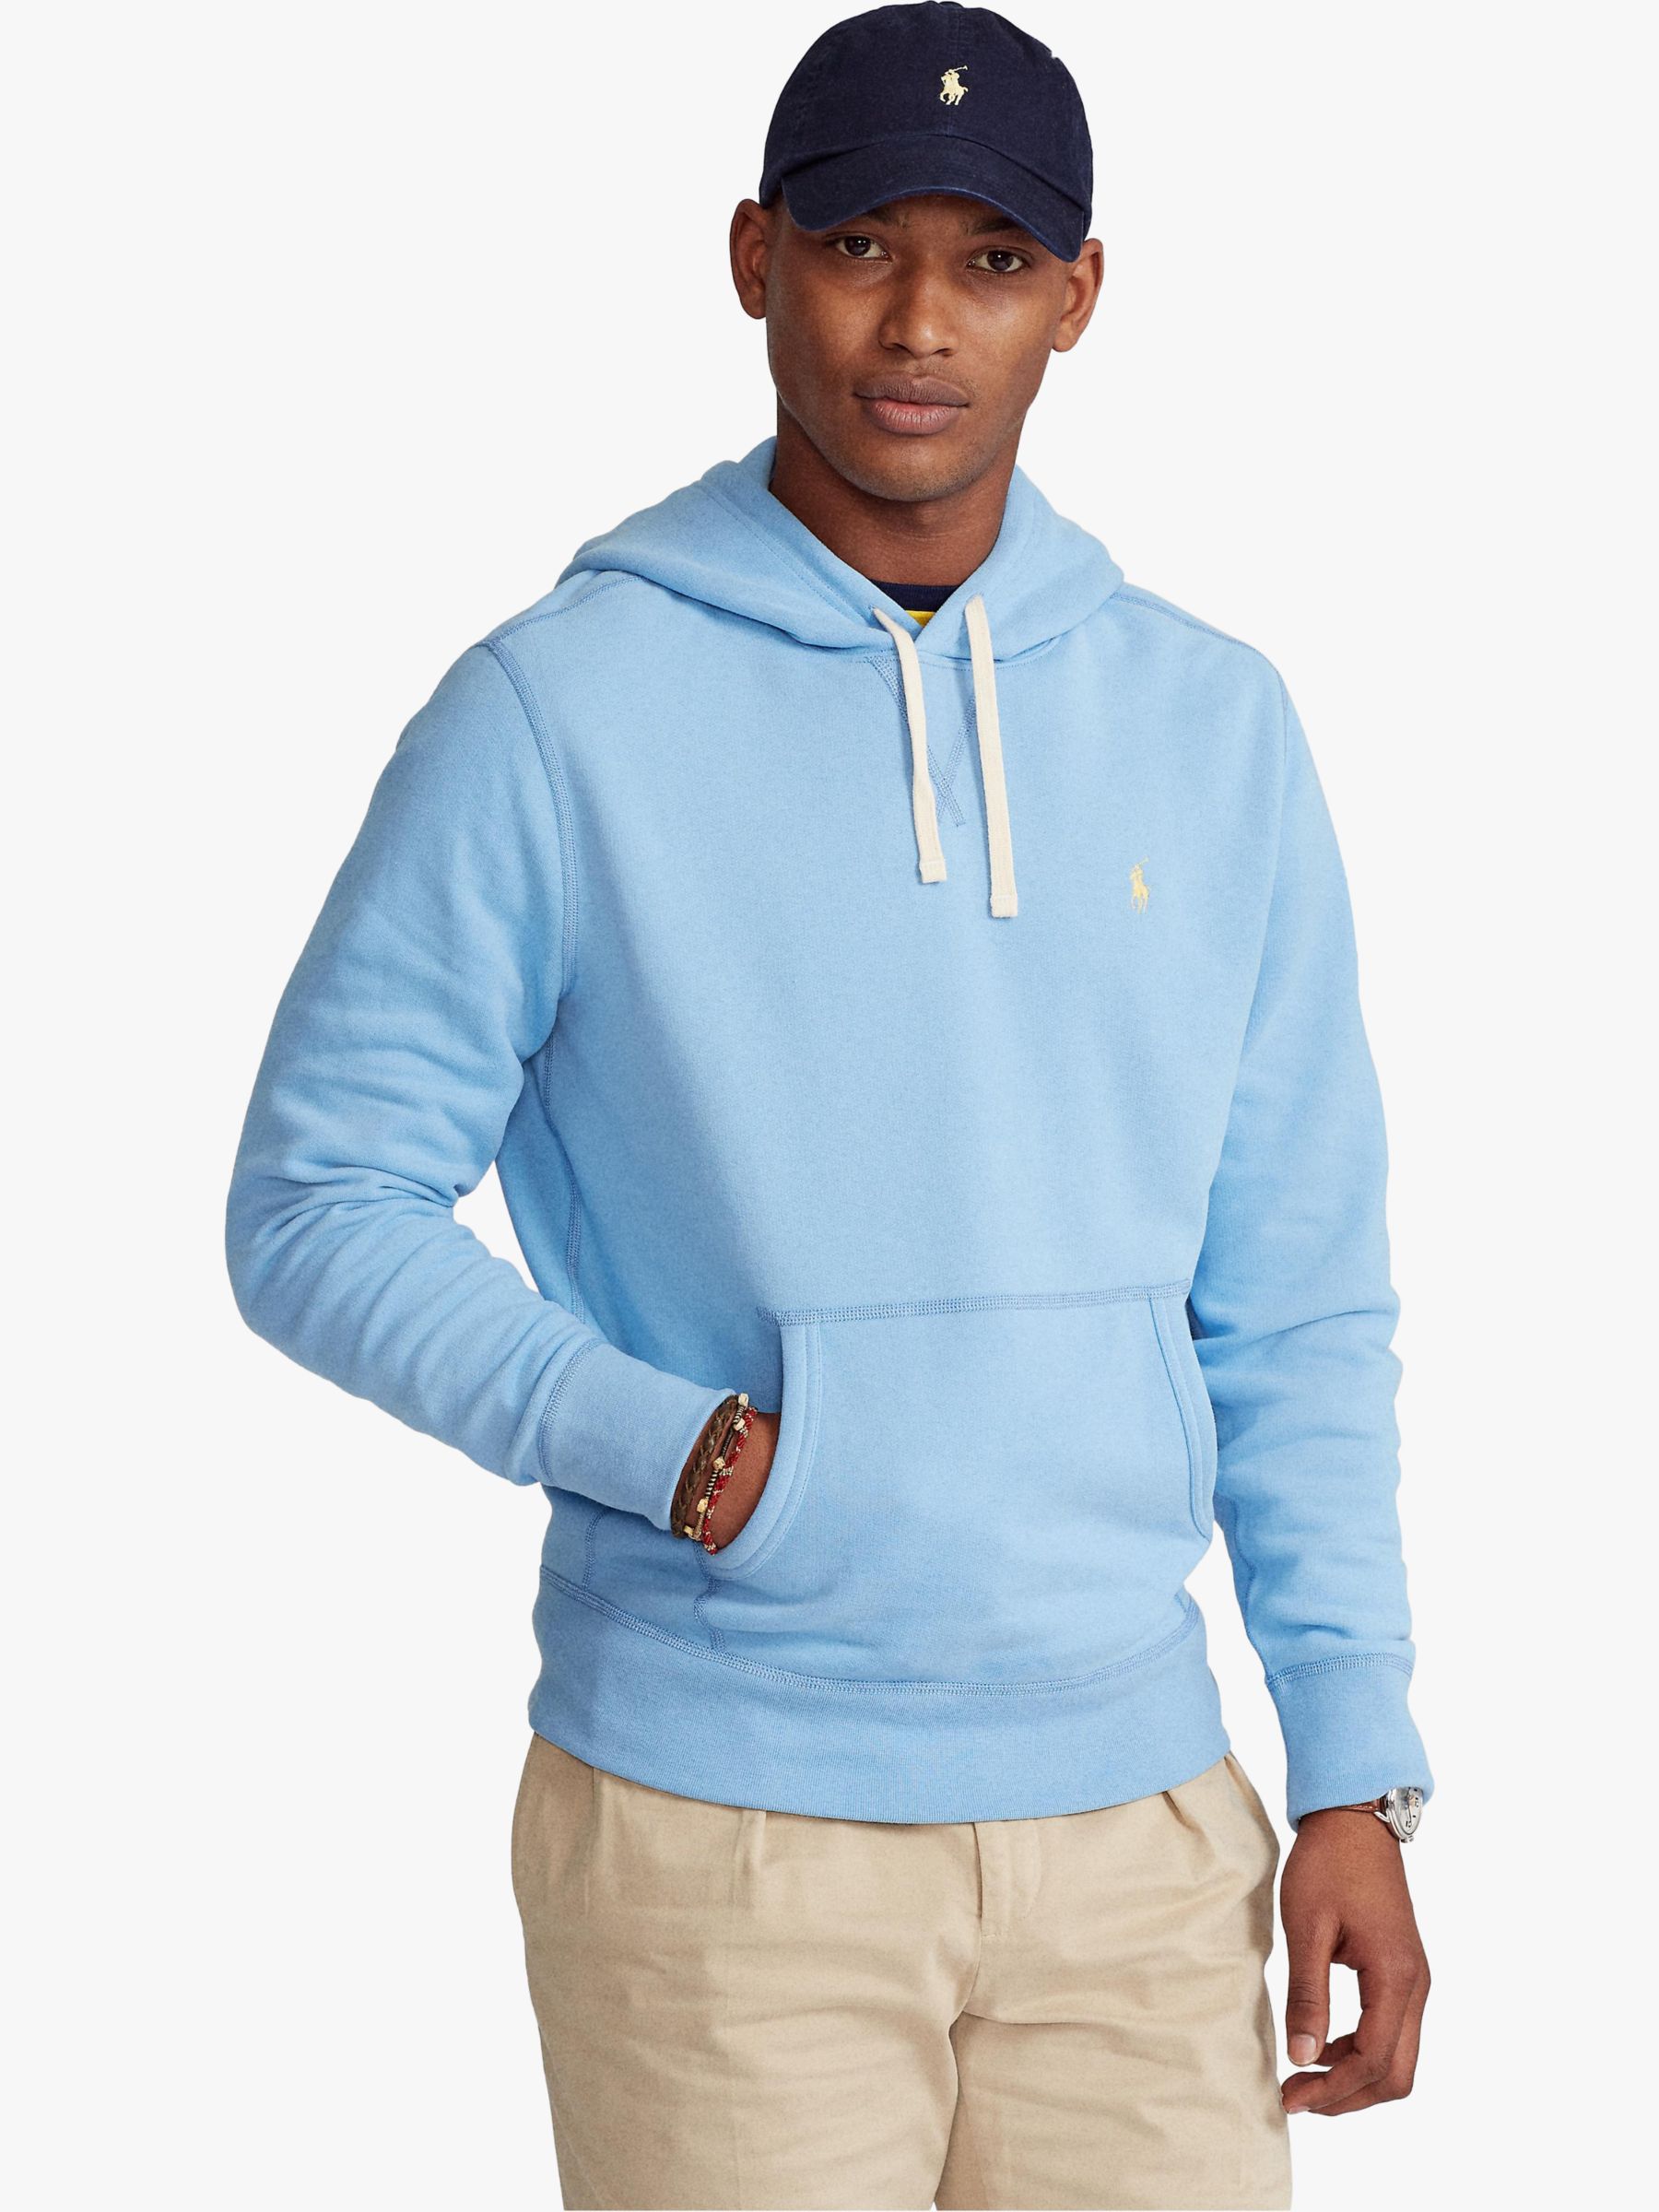 polo light hoodie,Save up to 19%,www.ilcascinone.com